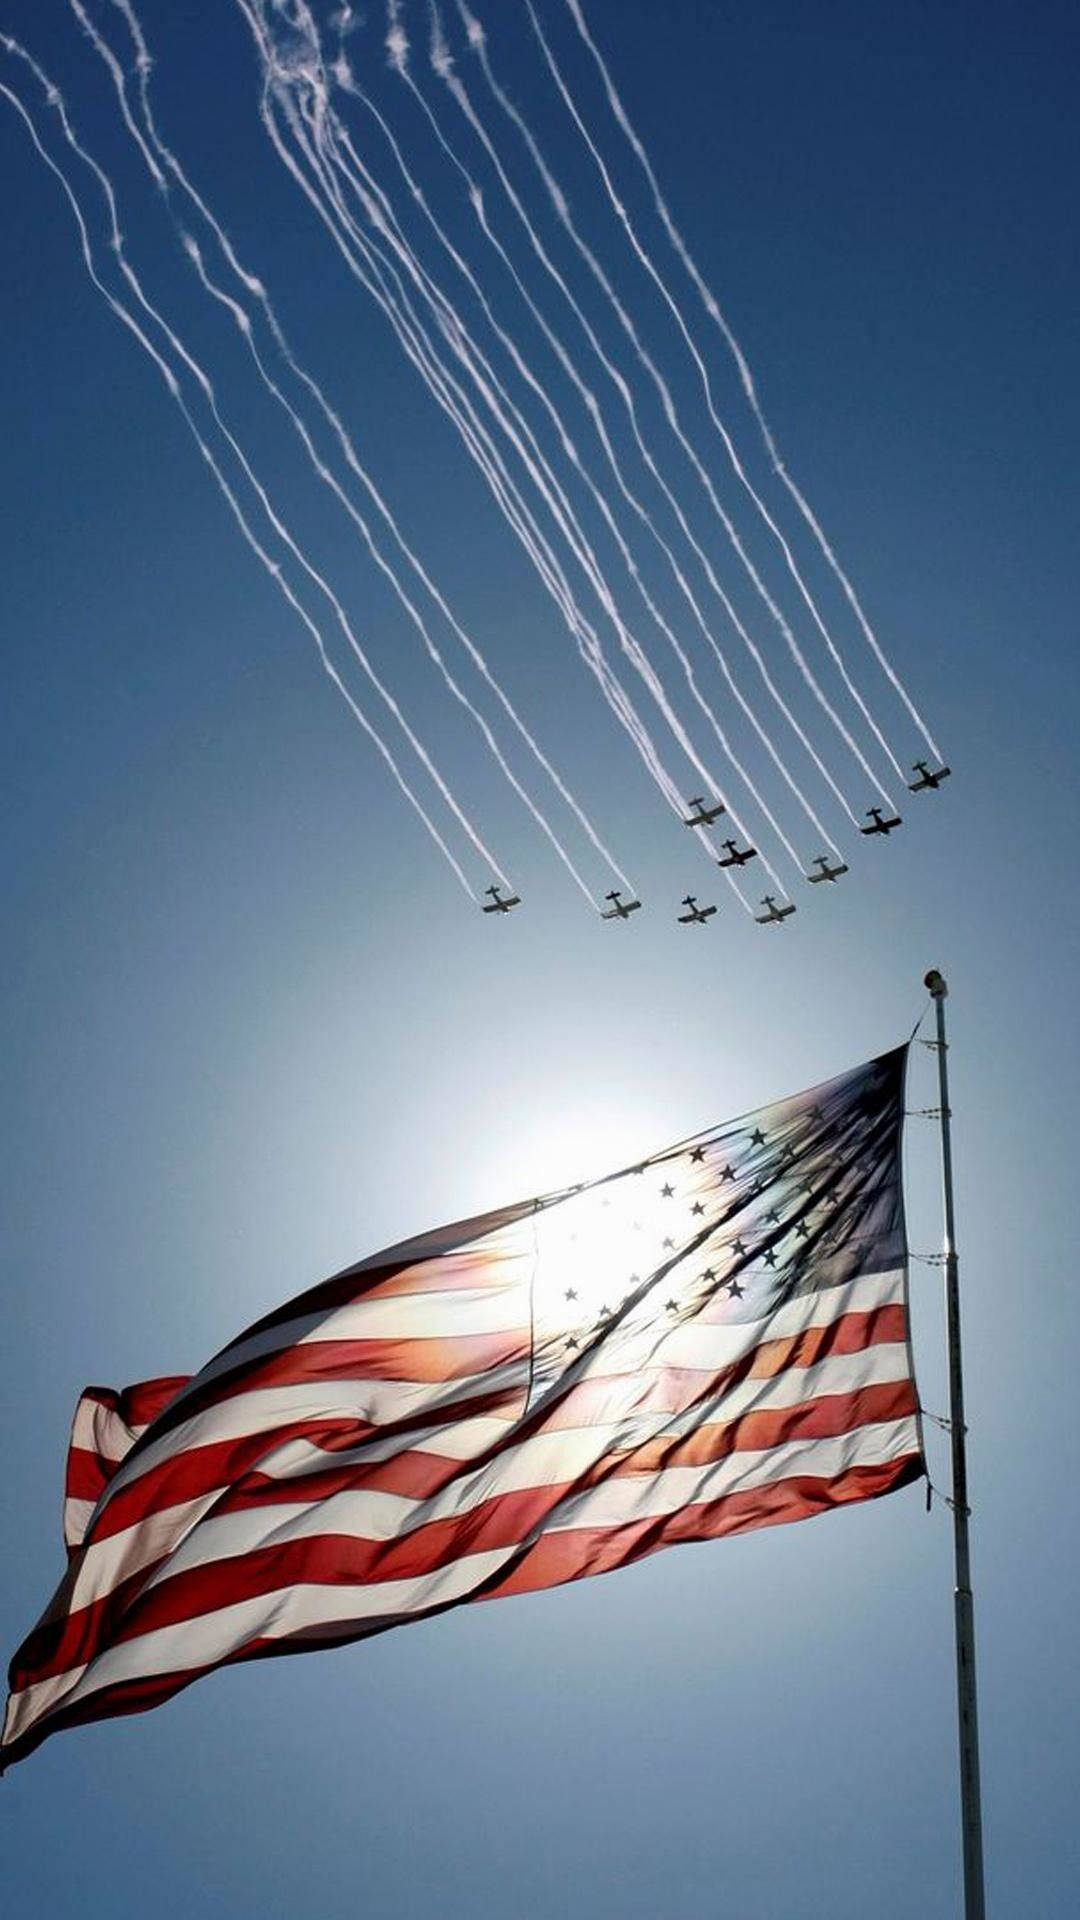 Fighter Jets Over Flag Of America Iphone Wallpaper